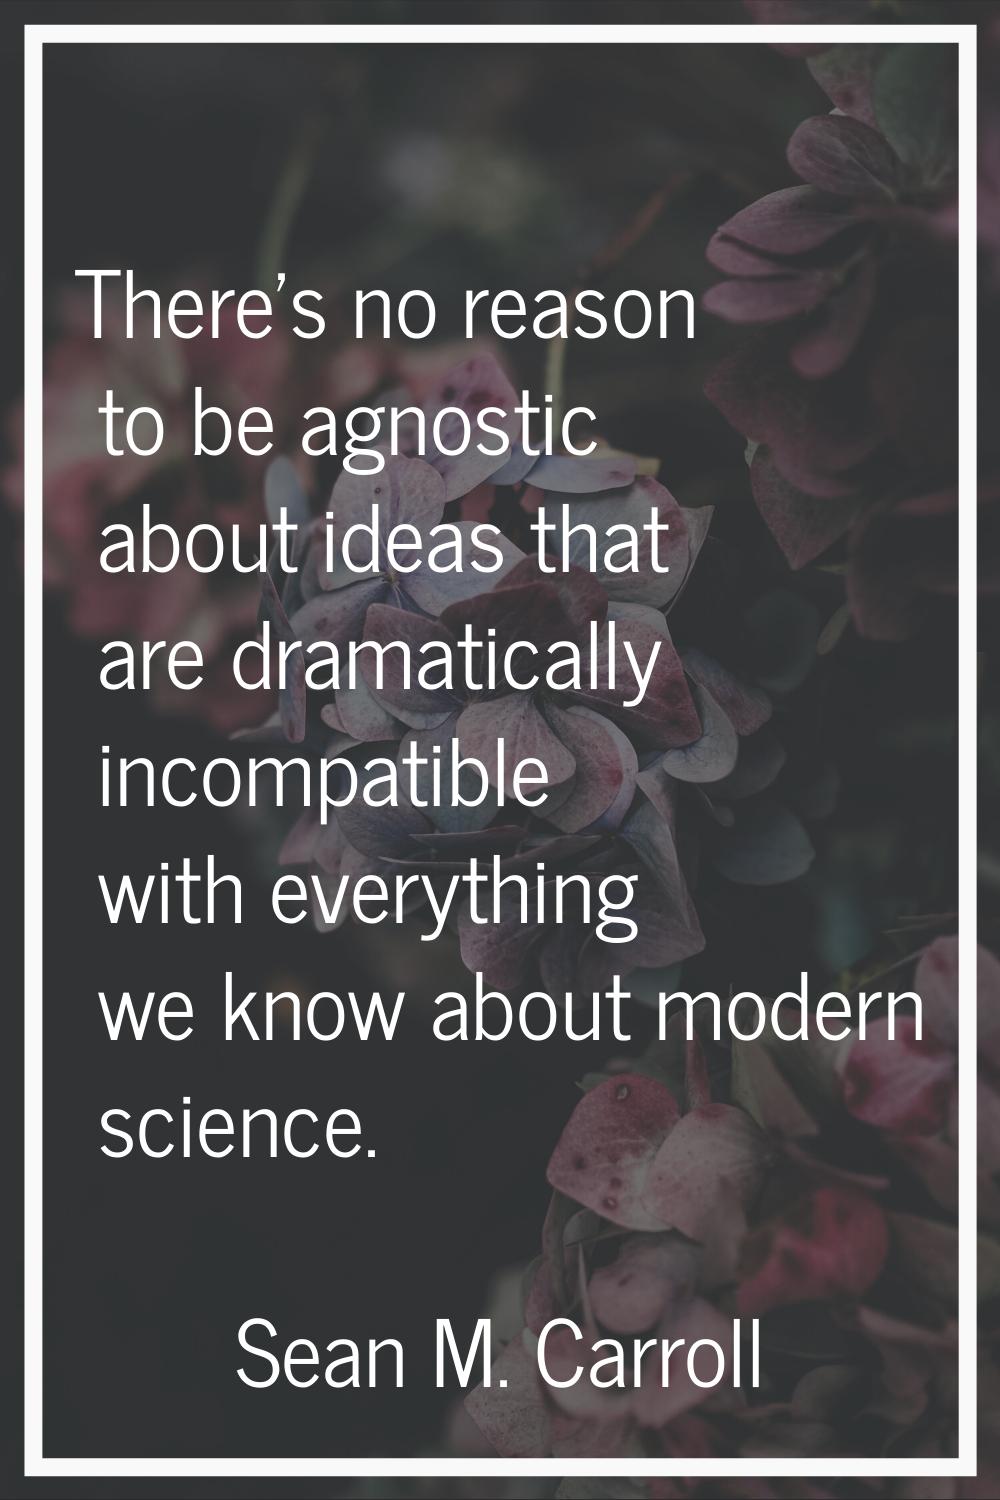 There's no reason to be agnostic about ideas that are dramatically incompatible with everything we 